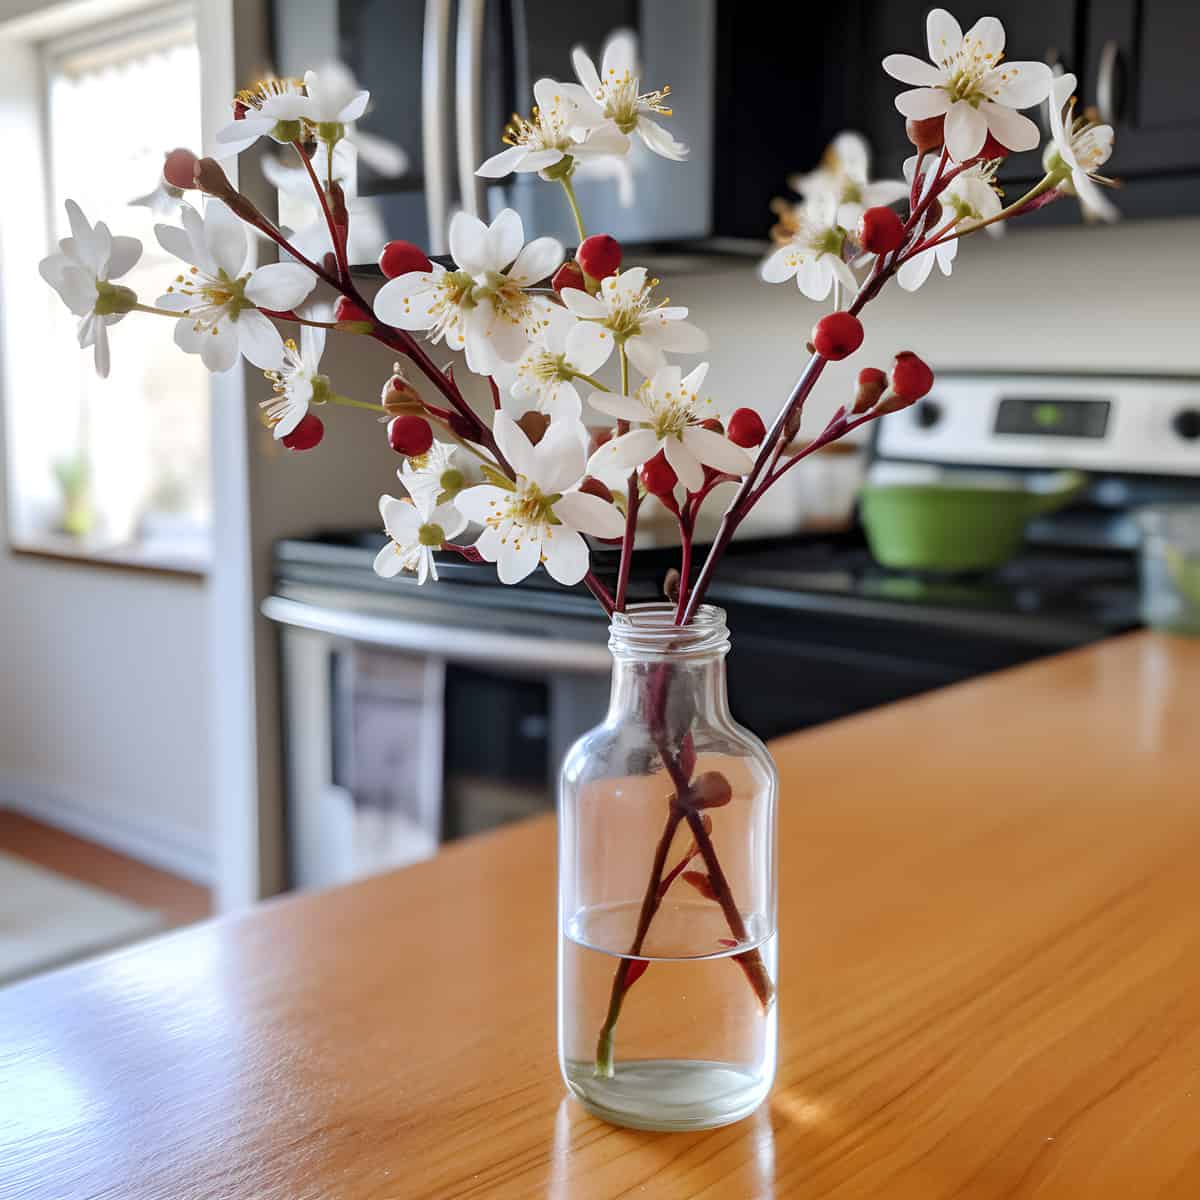 Low Serviceberry on a kitchen counter